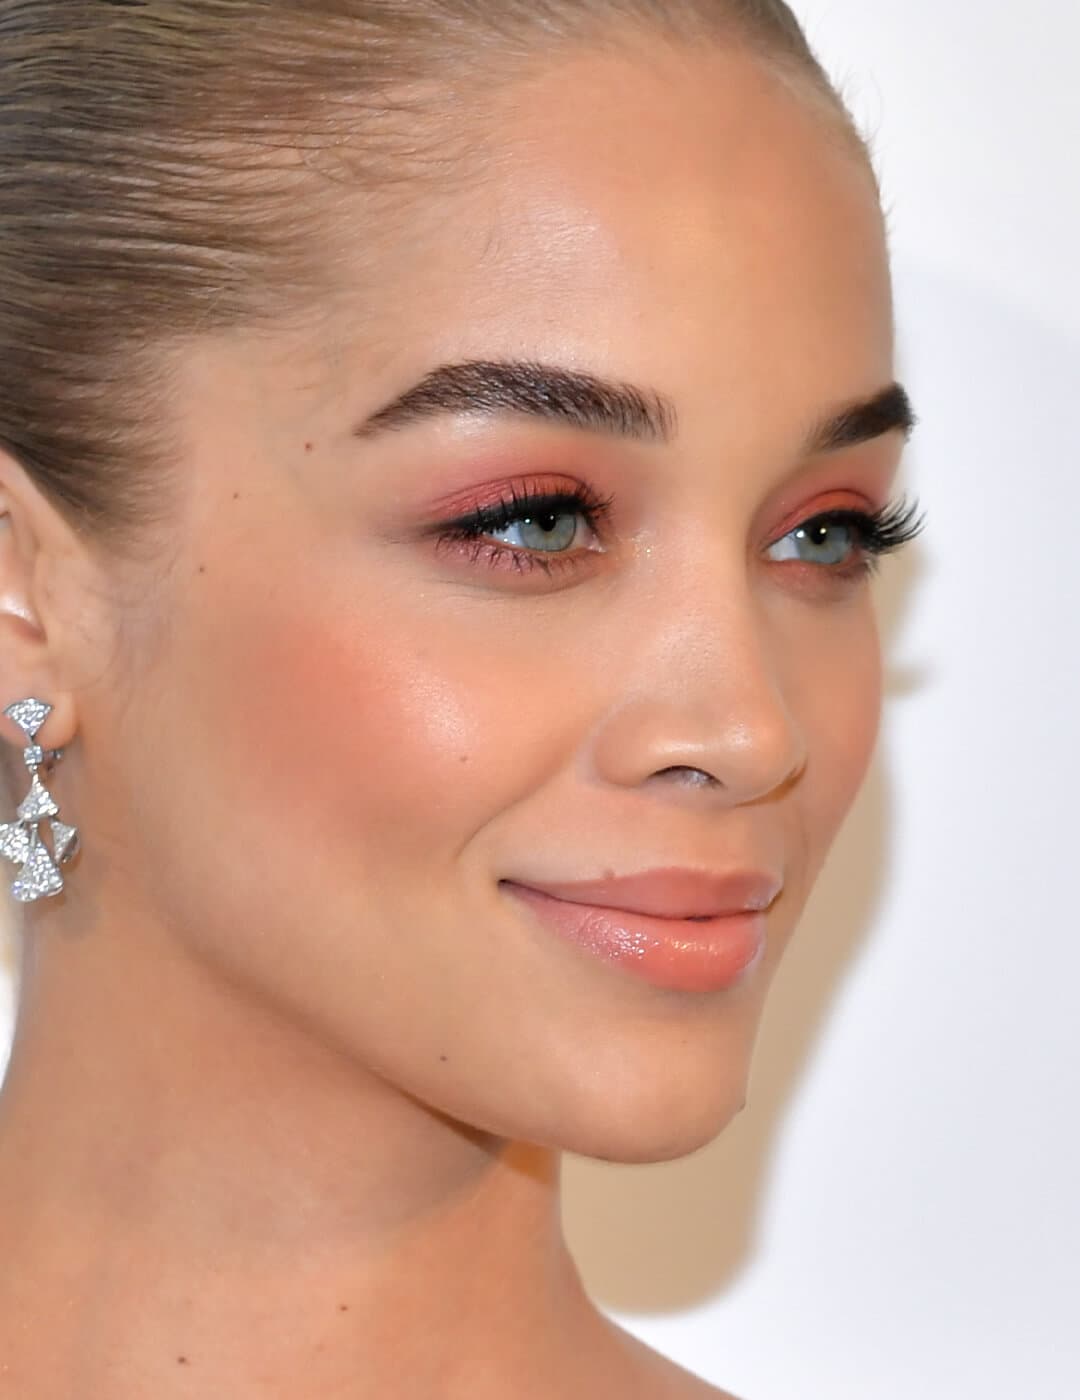 Jasmine Sanders rocking a pinky sunset eyeshadow look paired with a peachy blush and lipstick